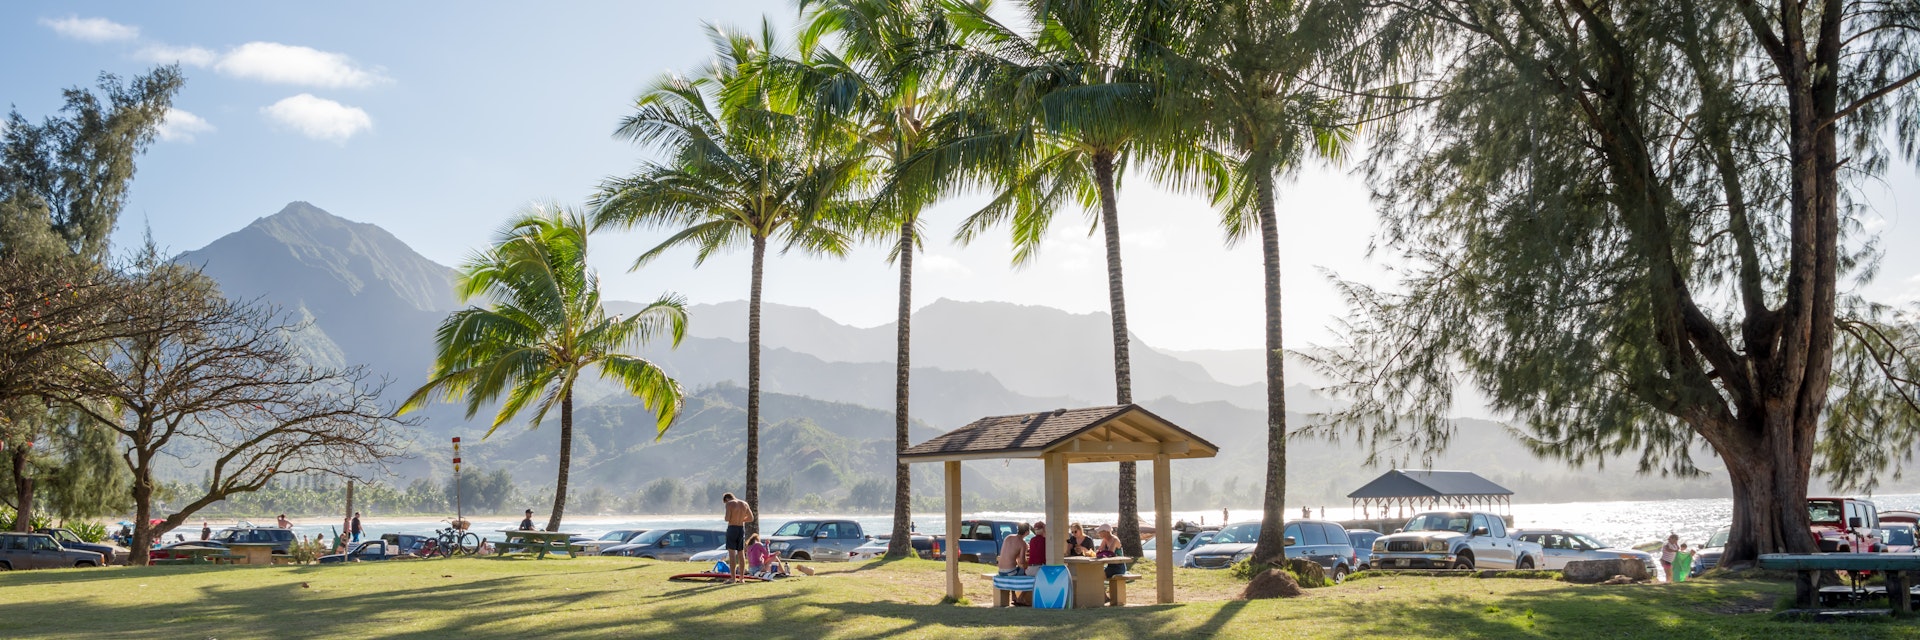 Hanalei, Kauai, February 8, 2016 - Hanalei Beach Park Pavilion is a popular beach for tourists & locals & has the often photographed Hanalei Pier, located on the North Shore of Kauai, Hawaii